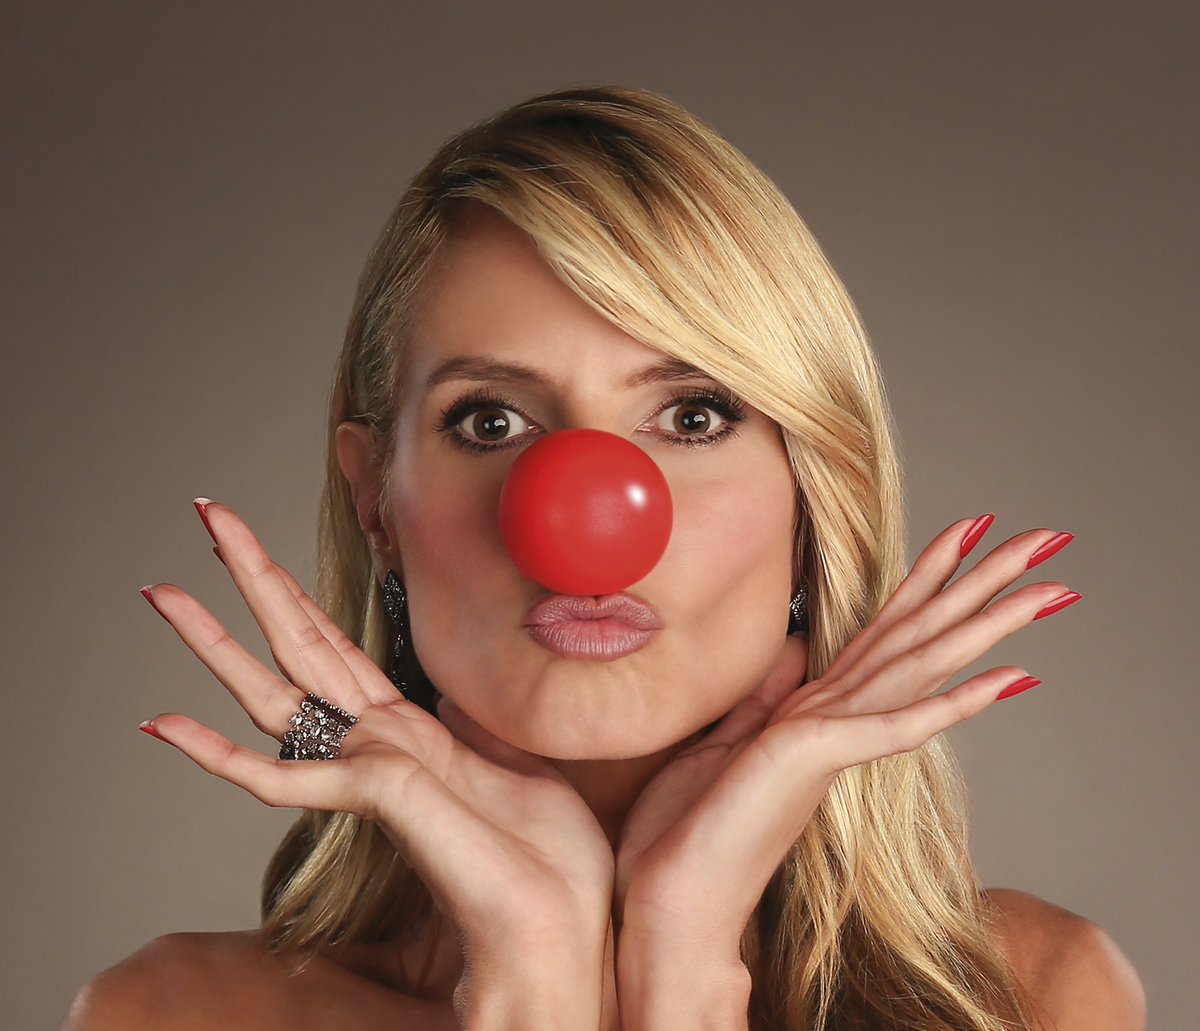 .@nbc’s #RedNoseDay Special is LIVE tonight! Tune in at 9/8c and don’t forget to donate! https://t.co/nTCj3czVpd https://t.co/phAlmCcU3a